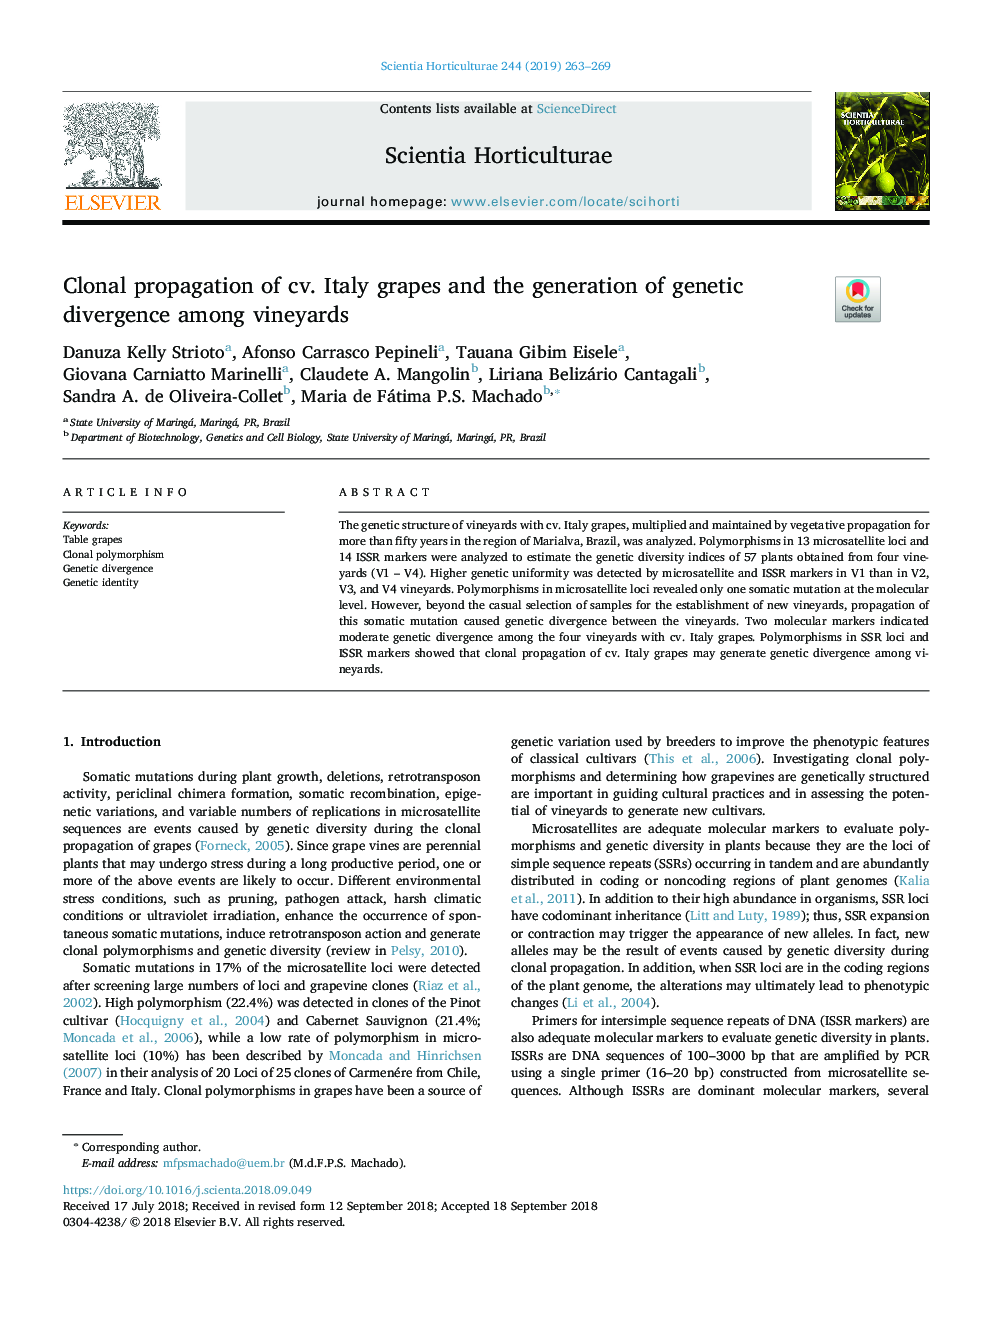 Clonal propagation of cv. Italy grapes and the generation of genetic divergence among vineyards